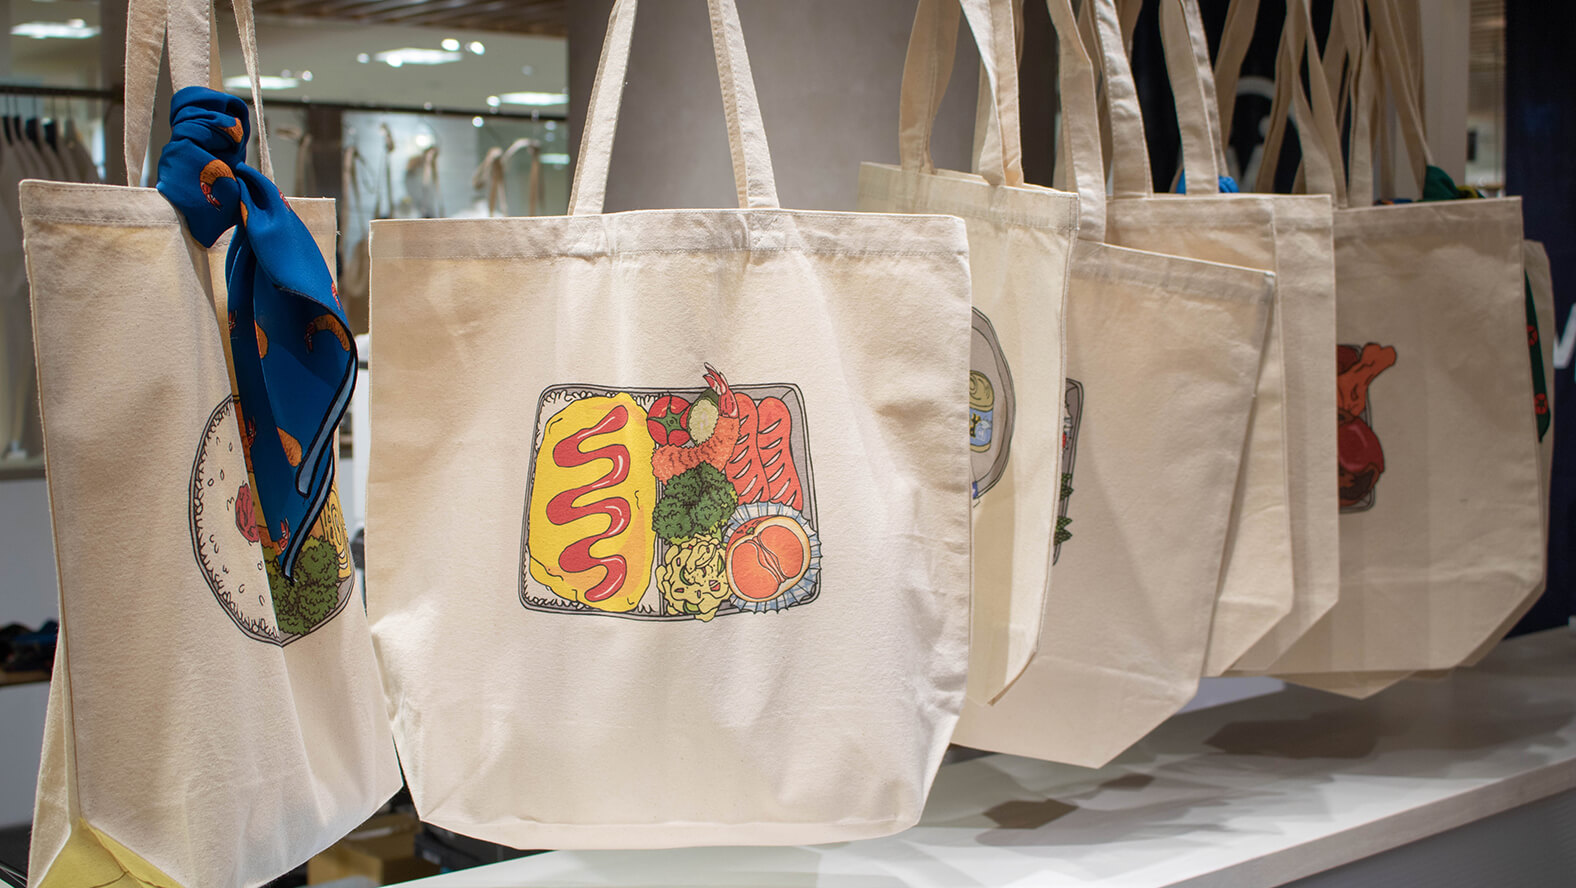 One-of-a-kind tote bags with unique bento lunchbox designs